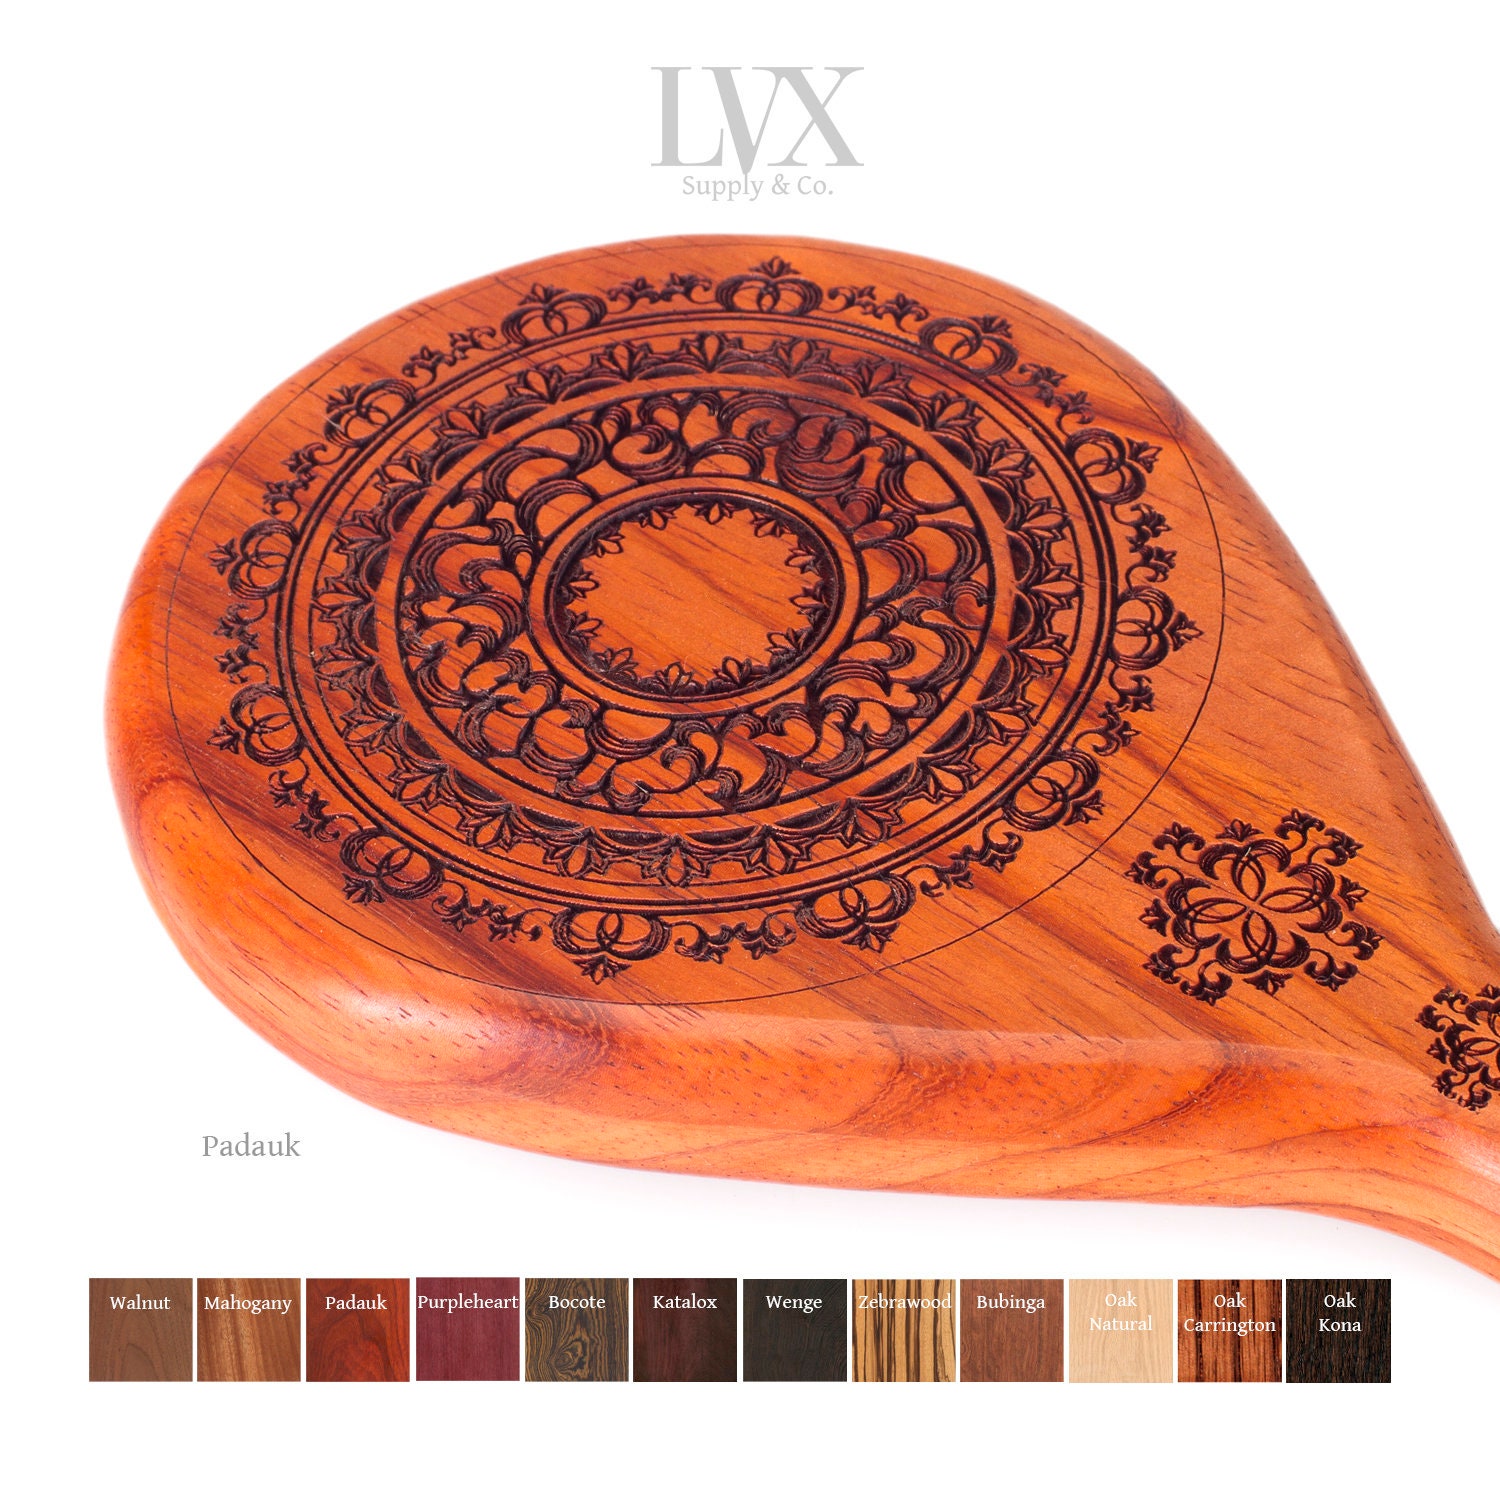 Regal Floral Spanking Paddle | Wood BDSM Paddle for DDlg Submissive Slave Punishment Otk BDsM-gear Impact Toys | BDSM Paddle by LVX Supply photo